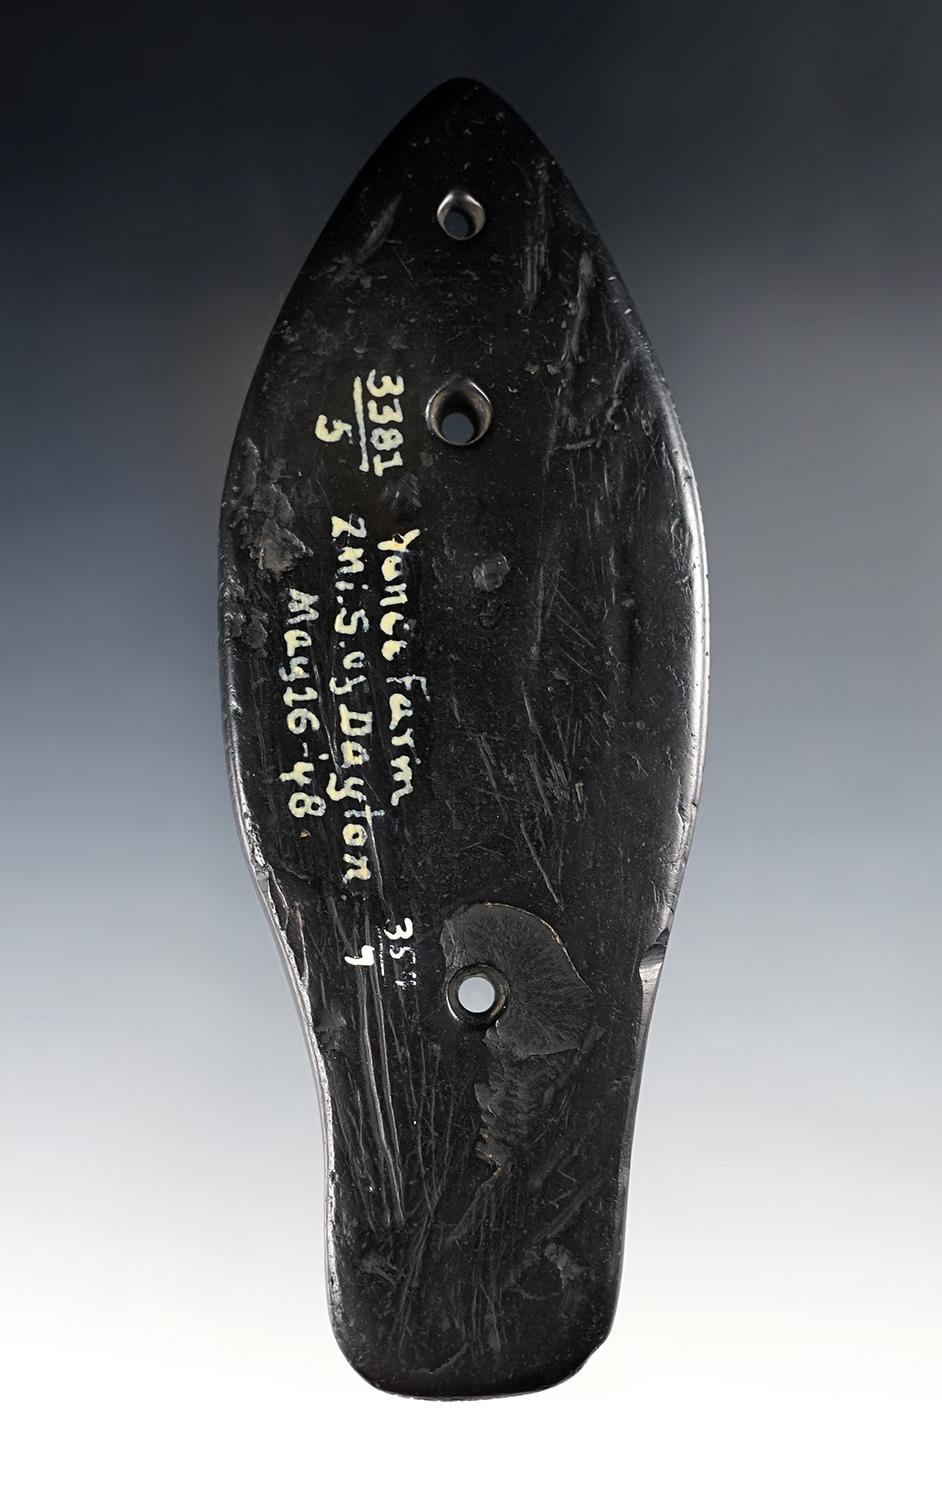 Ex. Meuser! 6 1/2"  Glacial Kame engraved & tallied Cannel Coal Gorget. Clark Co., OH. Pictured.